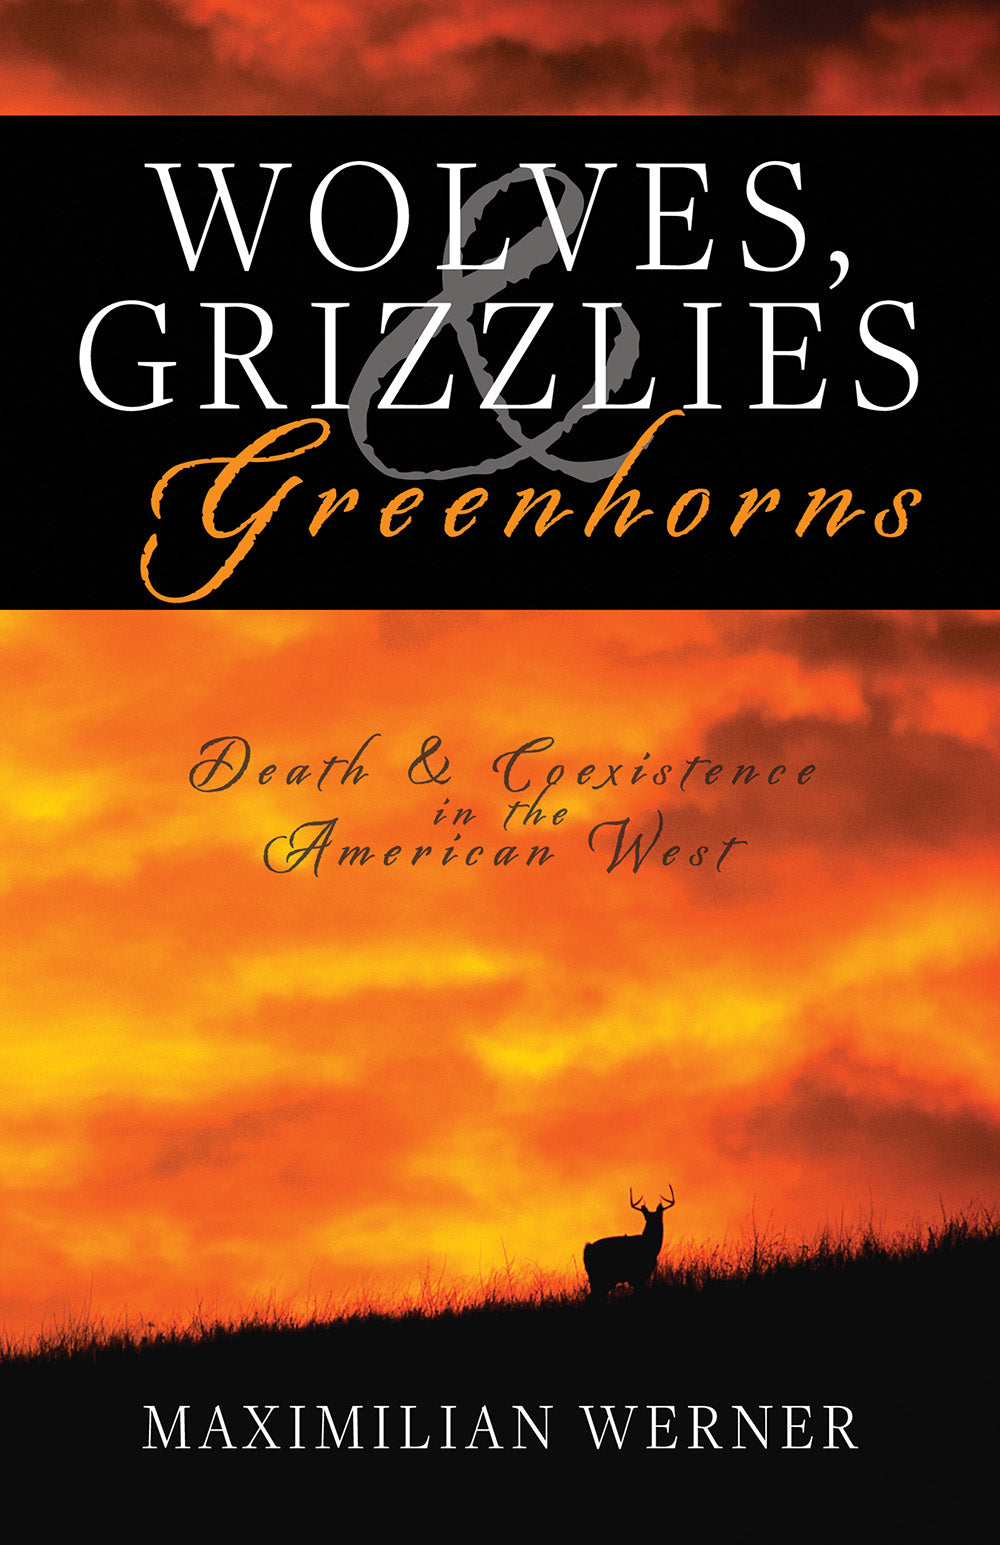 Wolves, Grizzlies and Greenhorns: Death and Coexistence in the American West